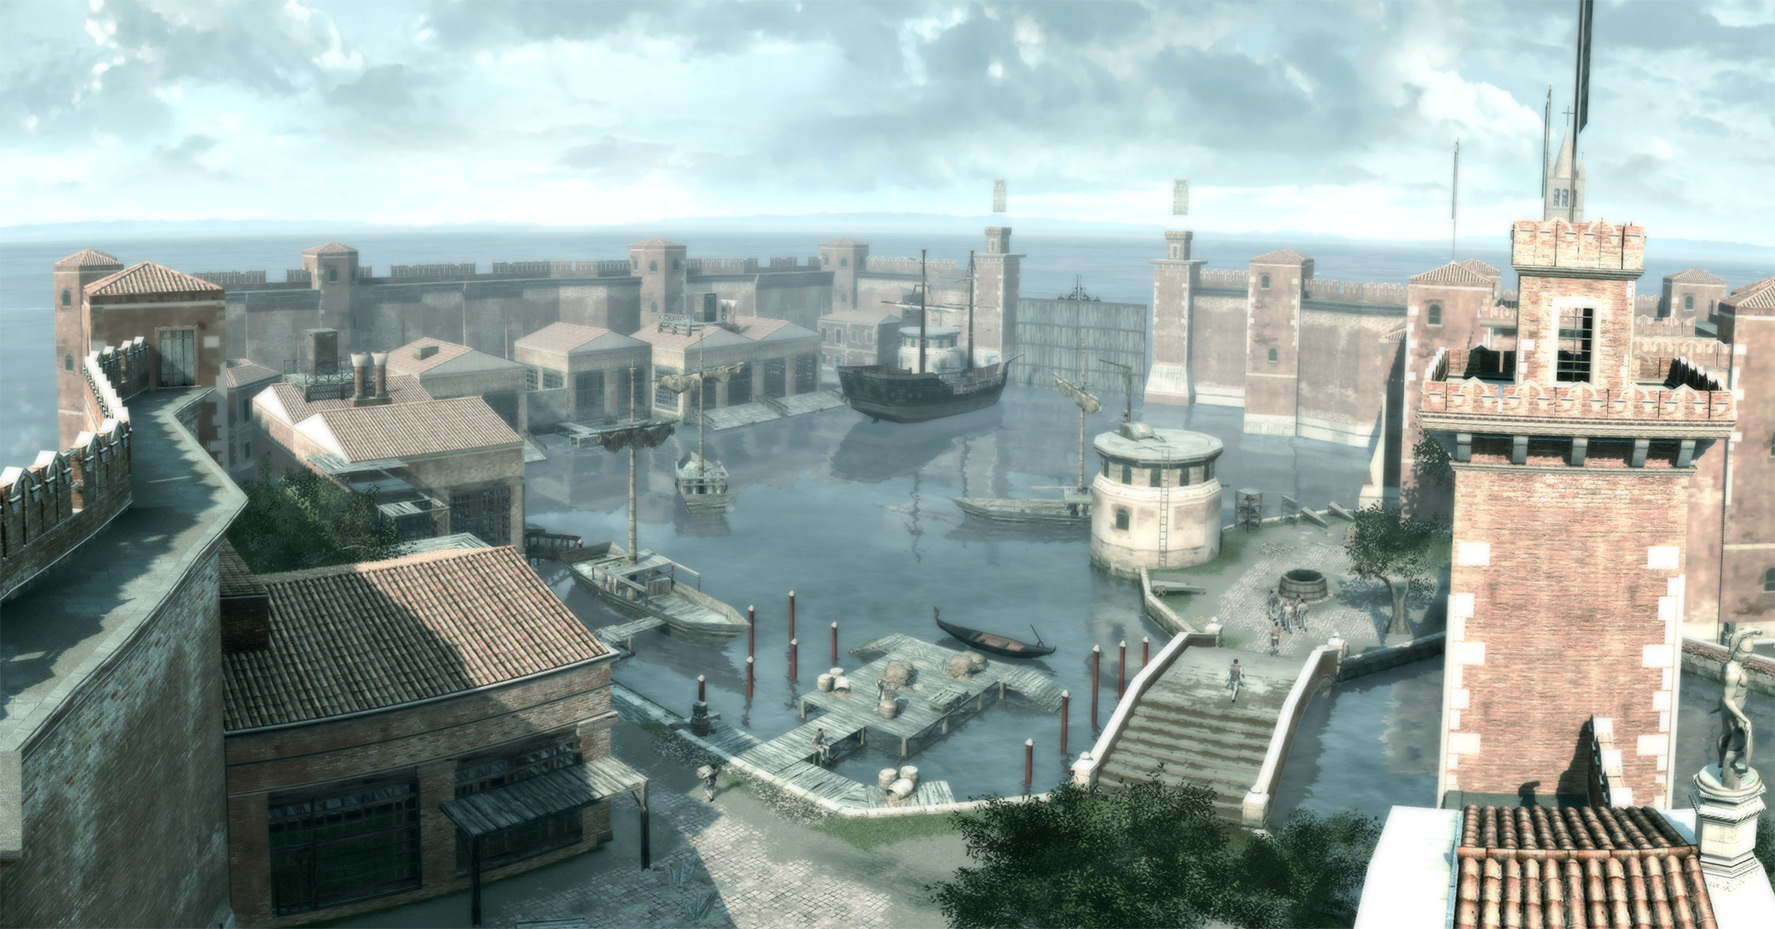 image-arsenaleoverview-jpg-assassin-s-creed-wiki-fandom-powered-by-wikia